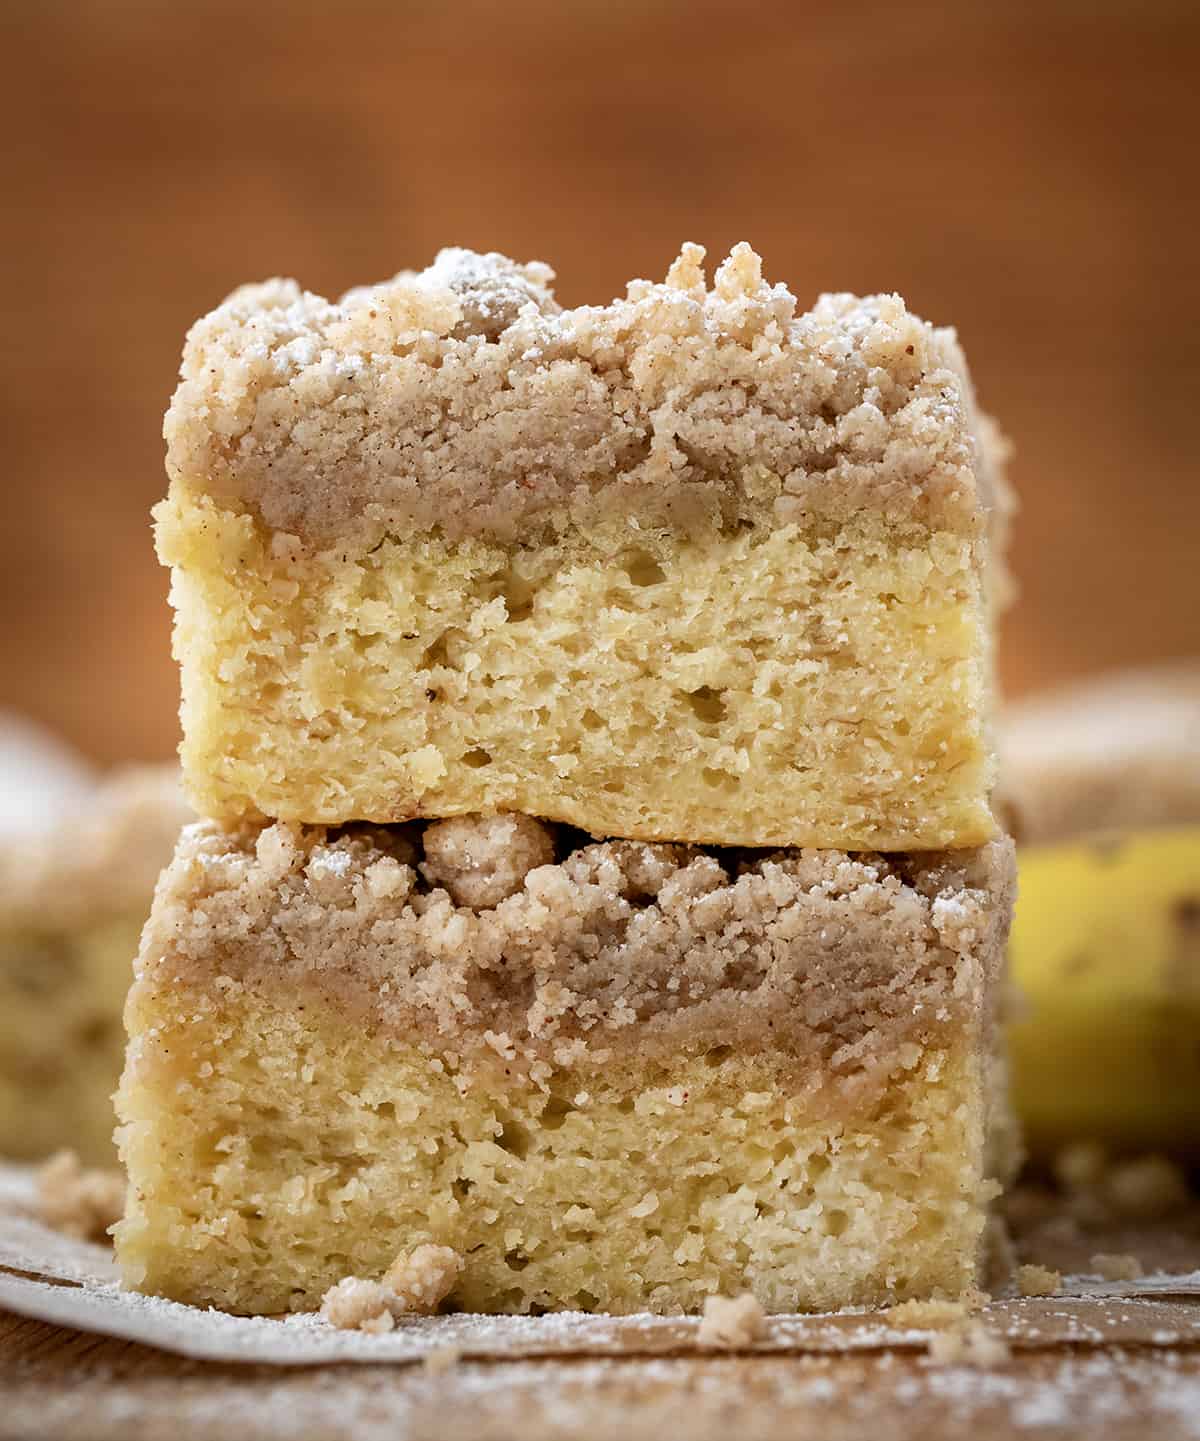 Pieces of Banana Crumb Cake stacked showing cake and crumb layers.